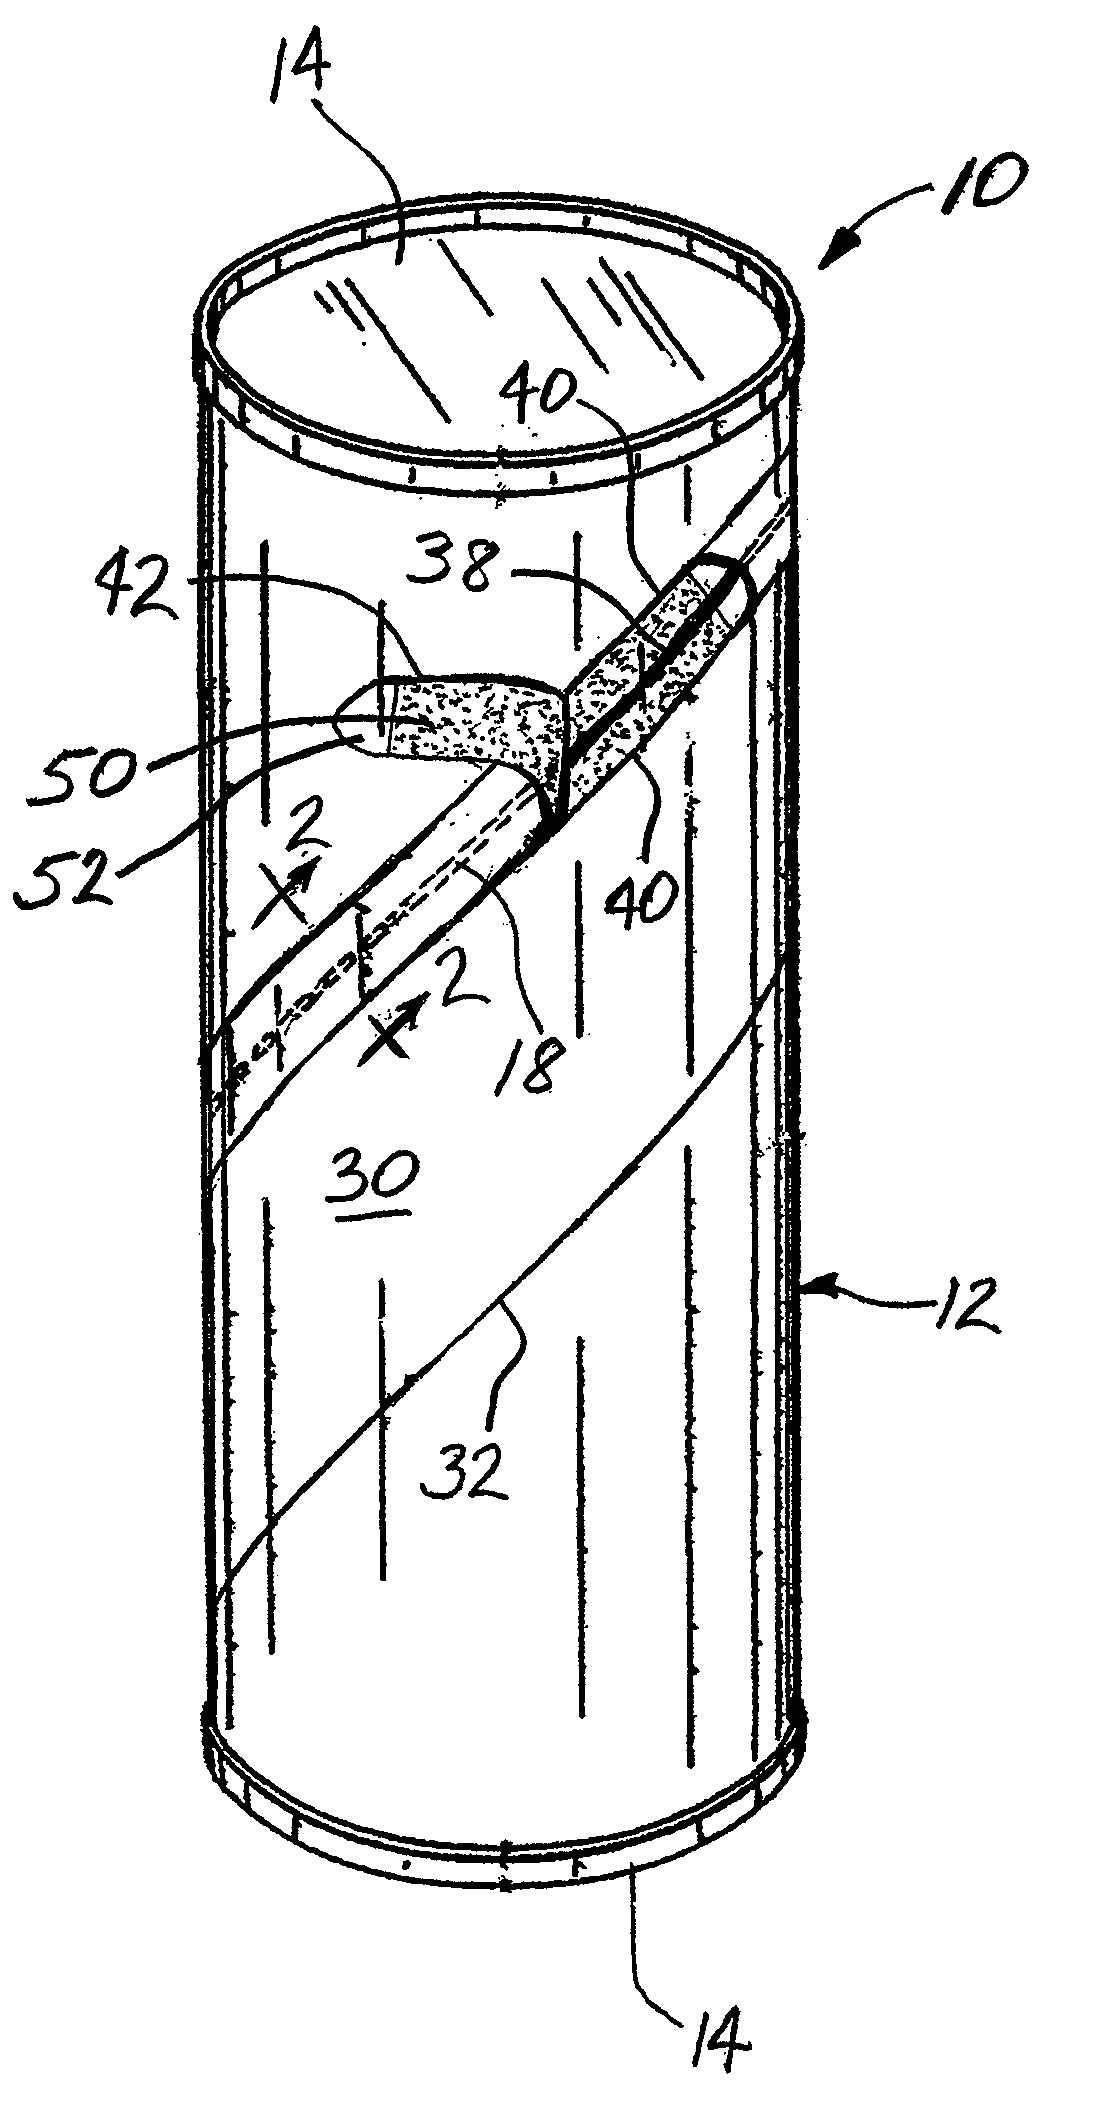 Composite container with integrated easy-open feature